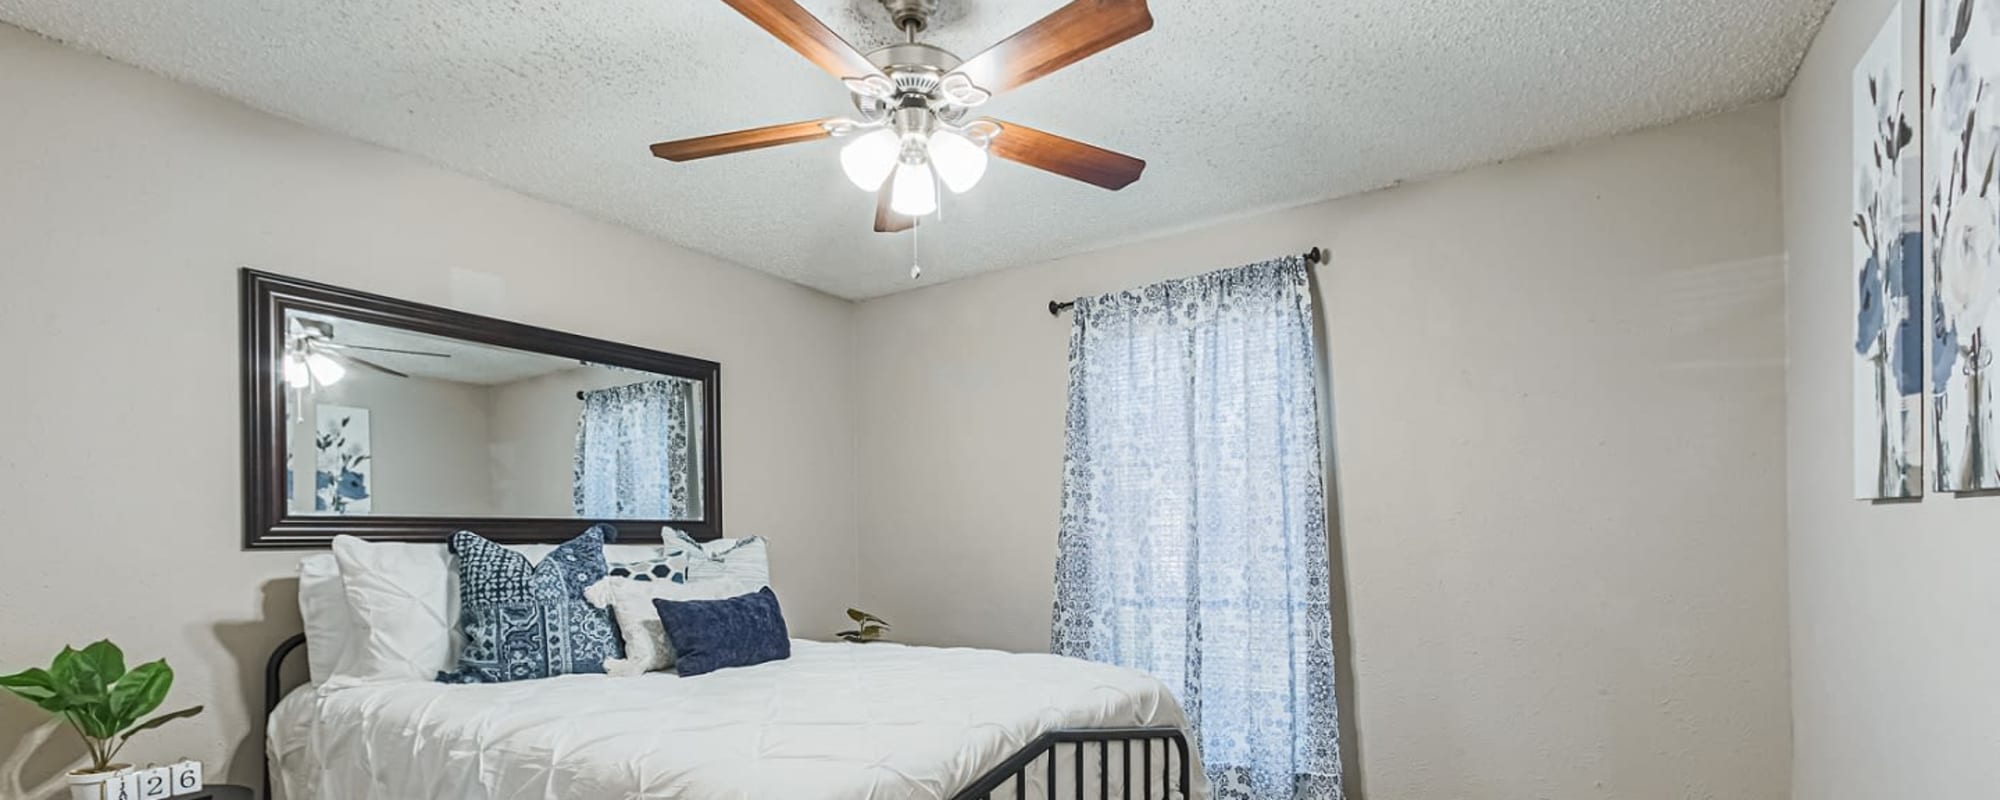 Bedroom with a ceiling fan at Retreat at 2818 in Bryan, Texas